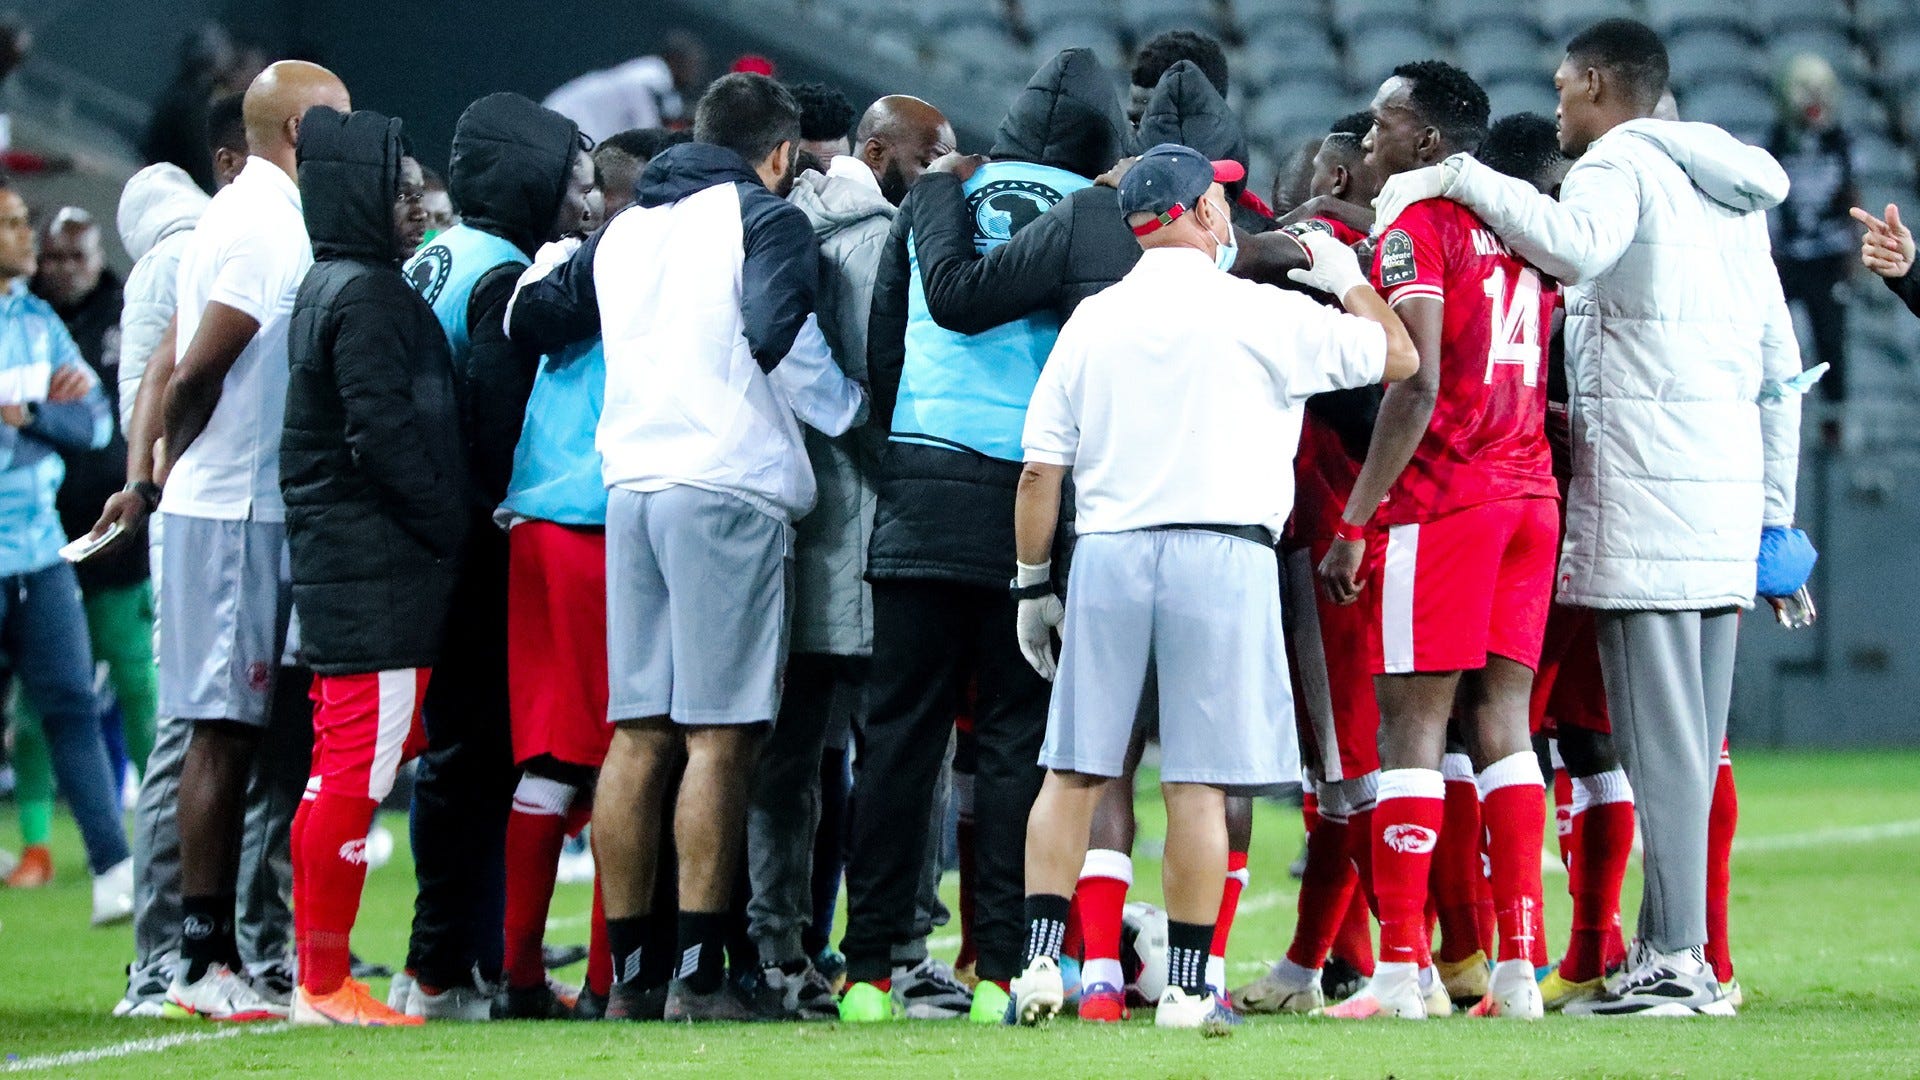 Simba SC players in South Africa.